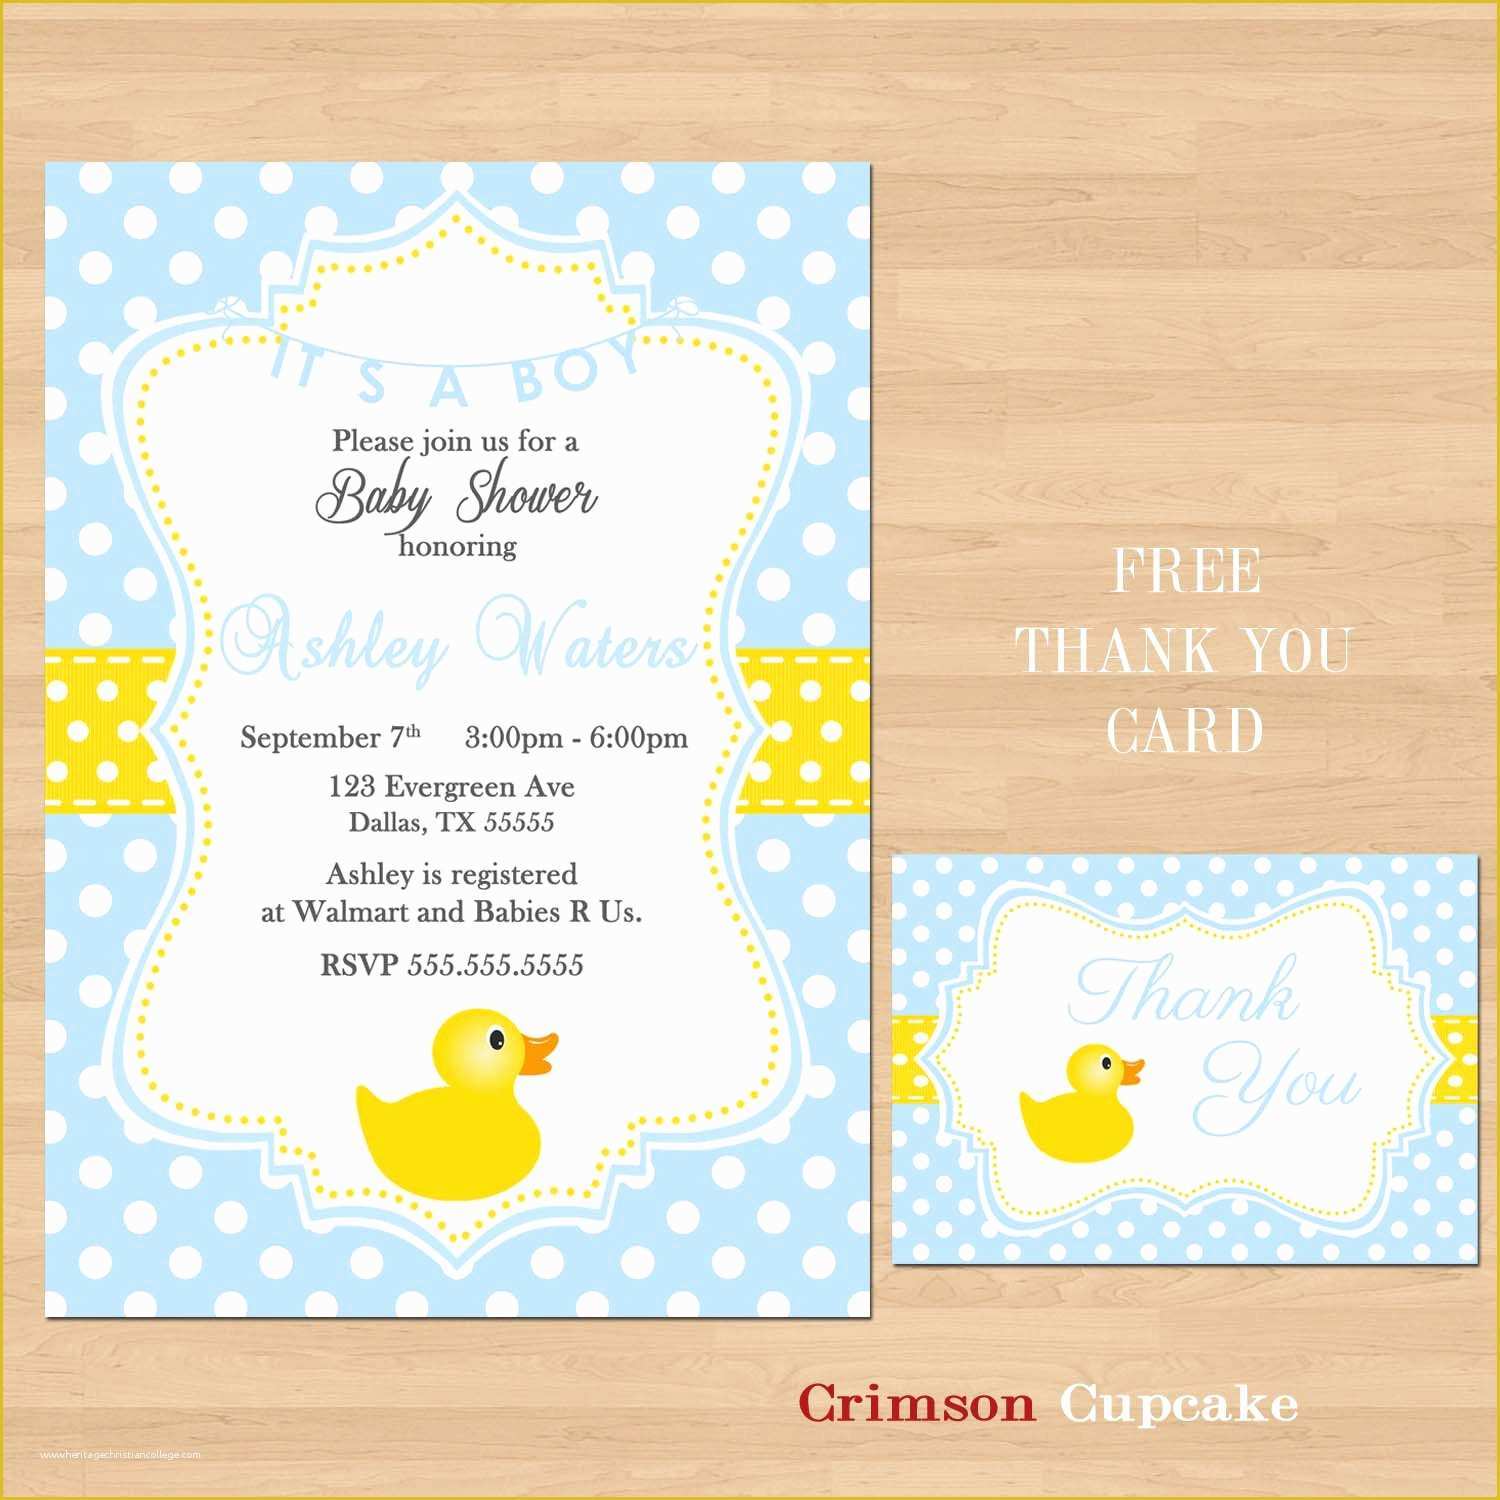 Rubber Ducky Baby Shower Invitations Template Free Of Printable Baby Shower Rubber Ducky Yellow Blue by